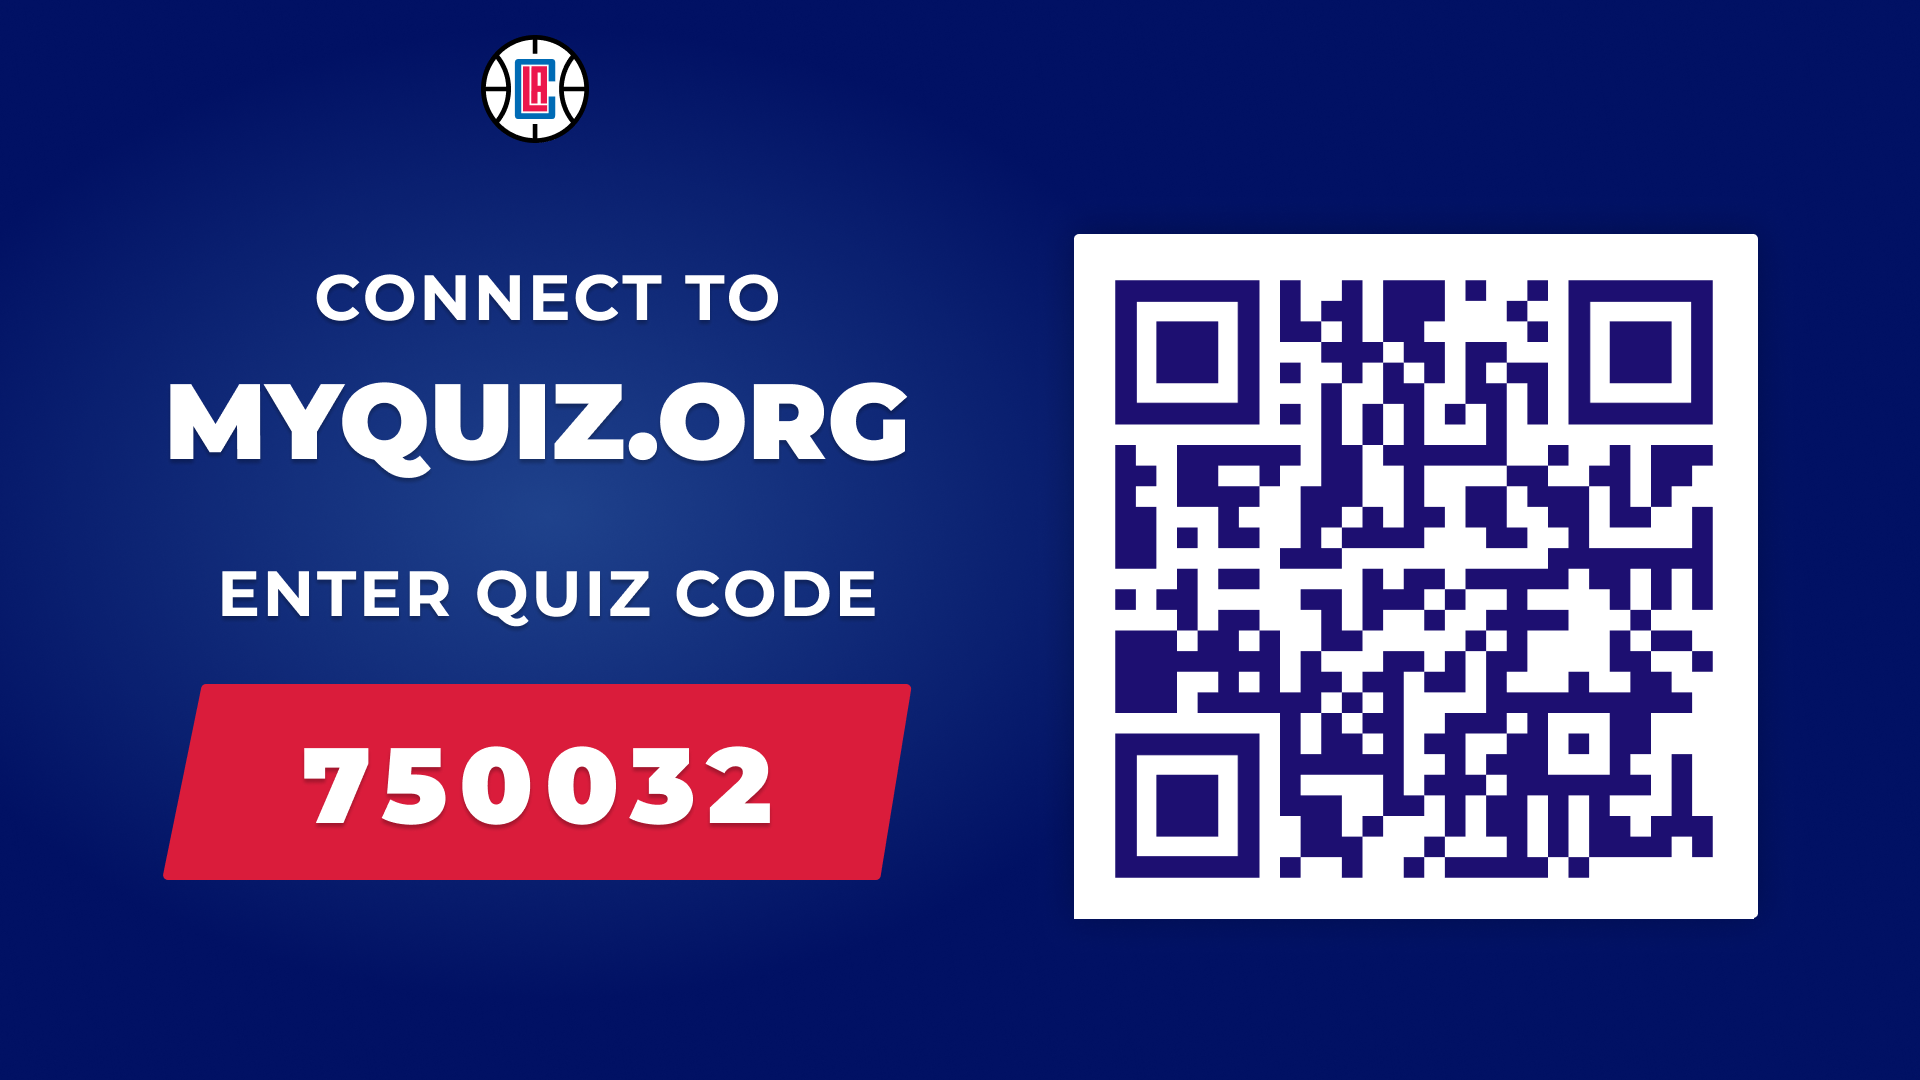 "Connect to the quiz" screen